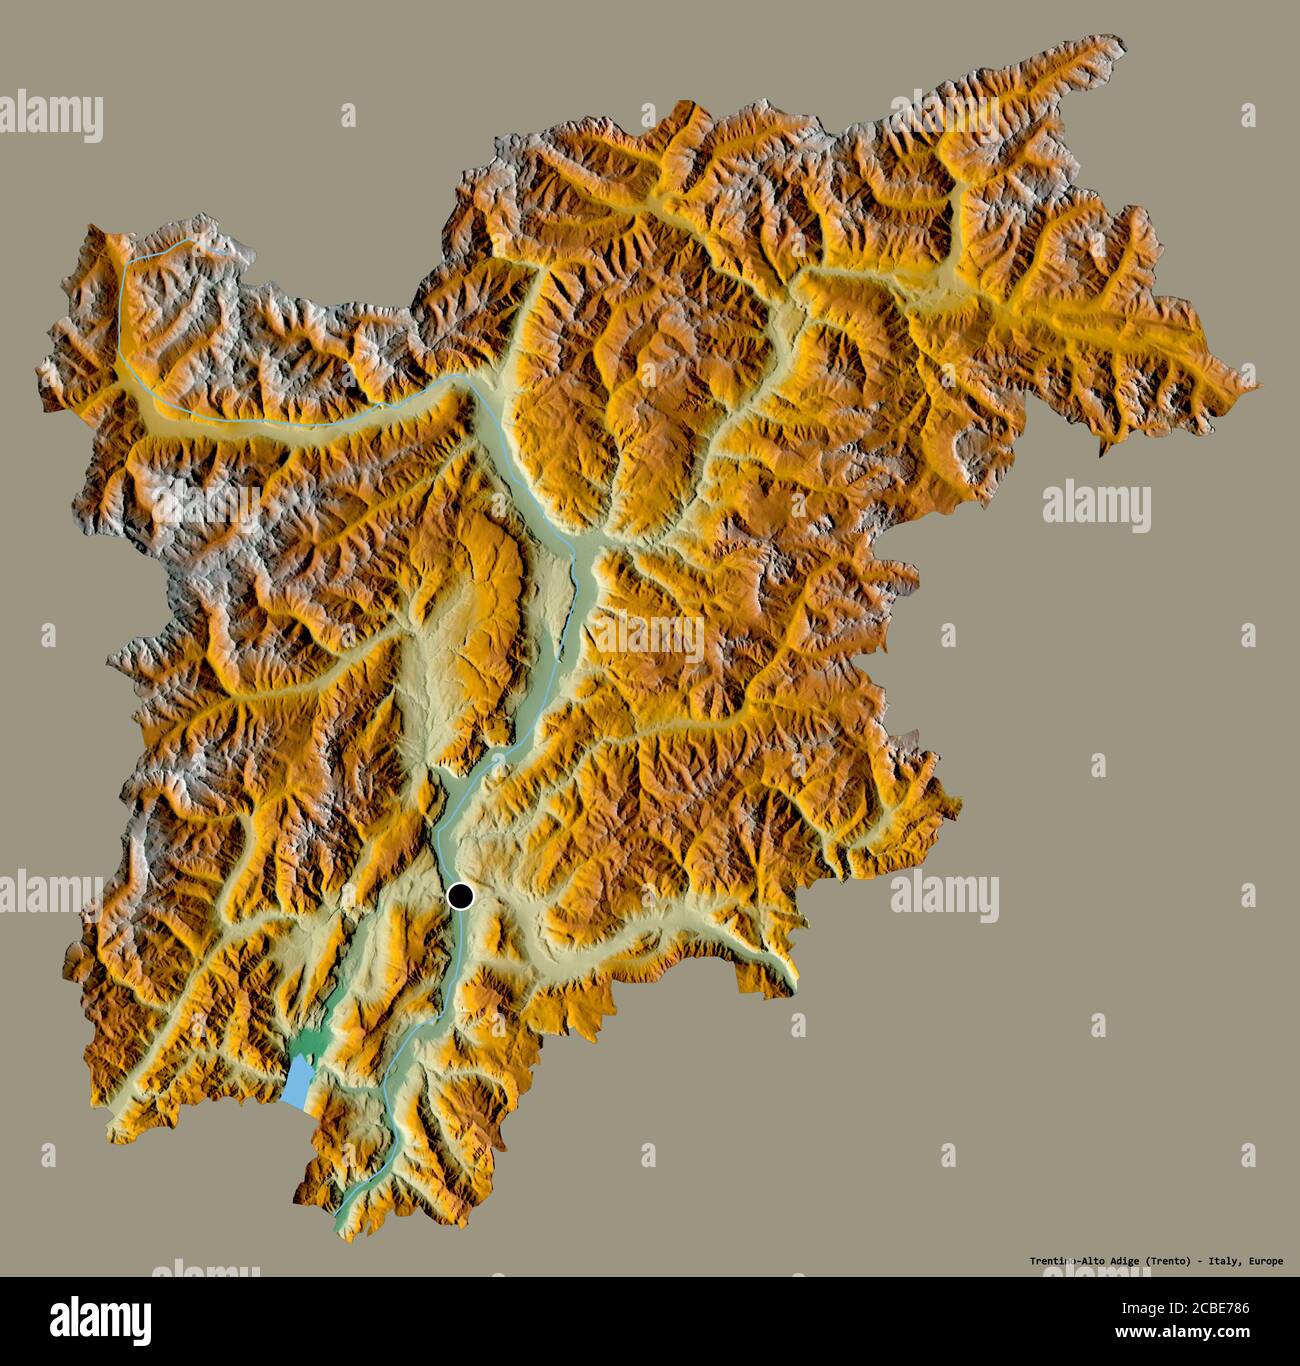 Shape of Trentino-Alto Adige, autonomous region of Italy, with its capital isolated on a solid color background. Topographic relief map. 3D rendering Stock Photo